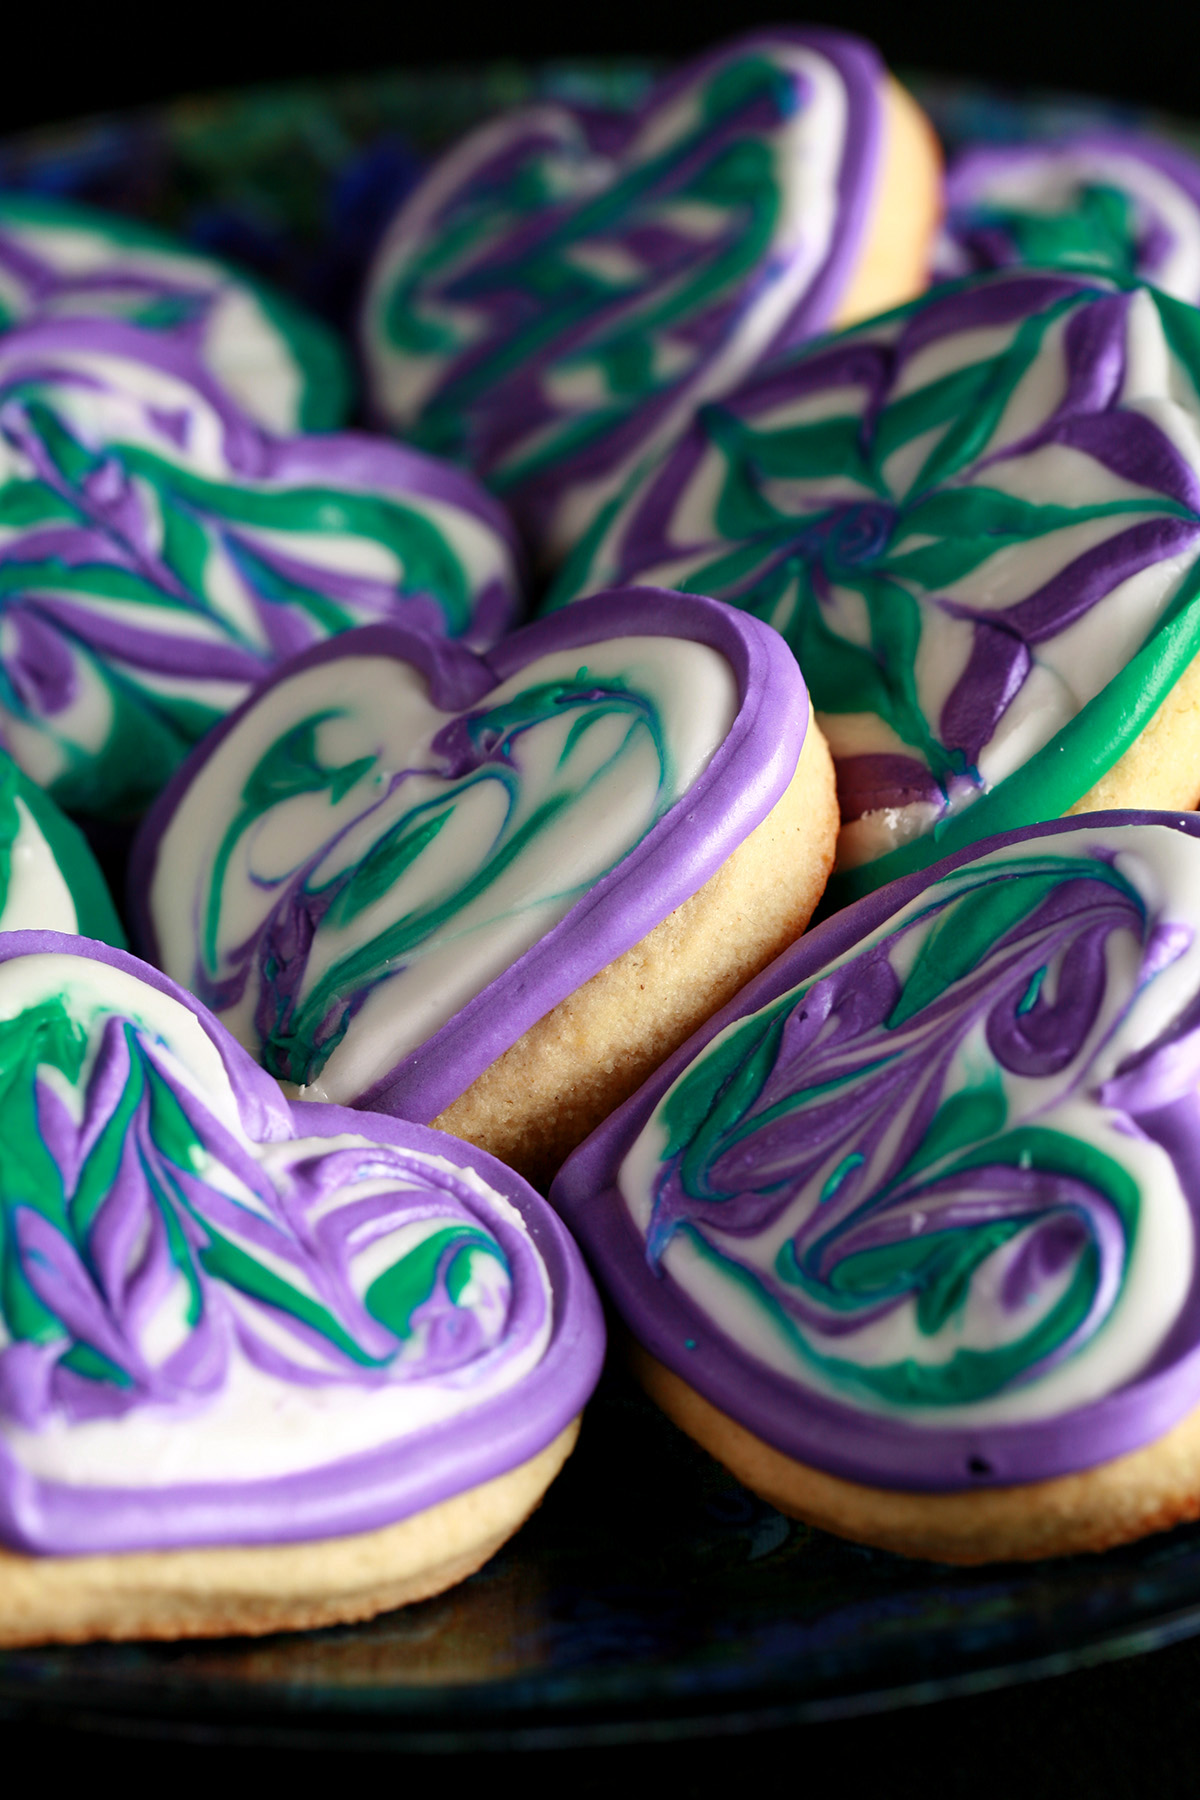 Close up view of a plate of heart shaped cookies decorated with swirls of teal and lavender over white.